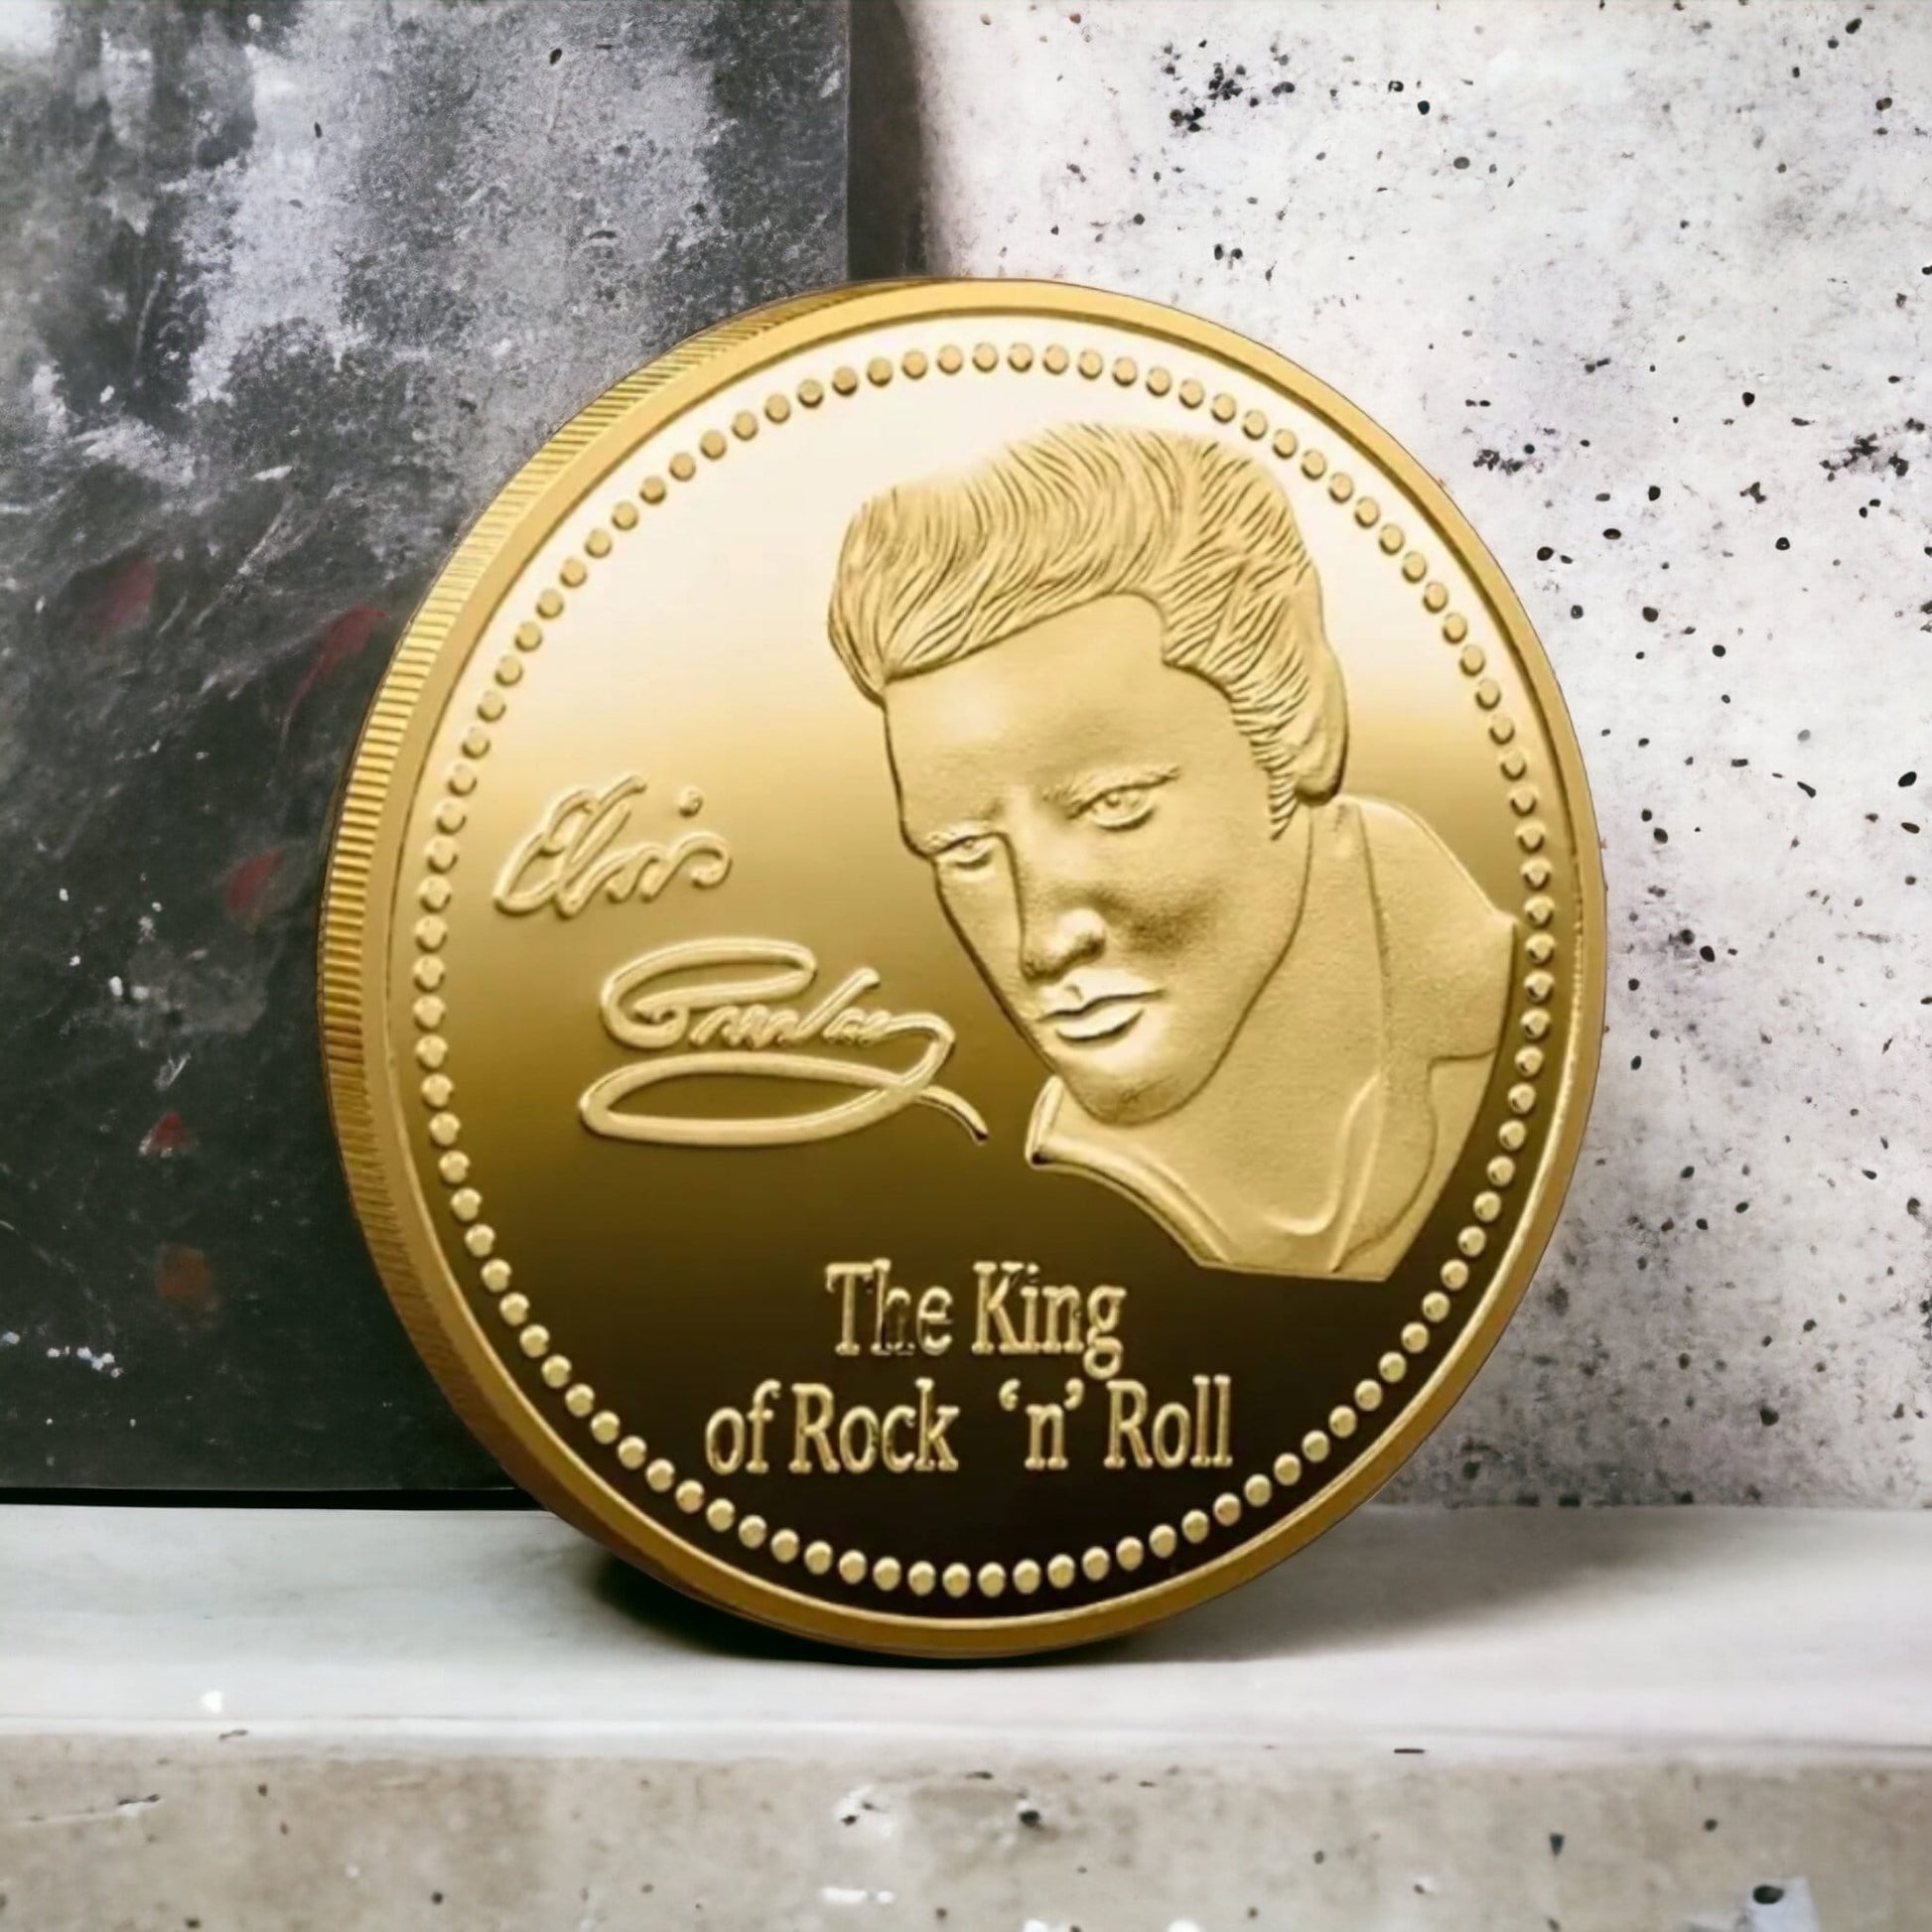 Elvis Presley gold plated coin commemorative souvenir coin King of rock and roll